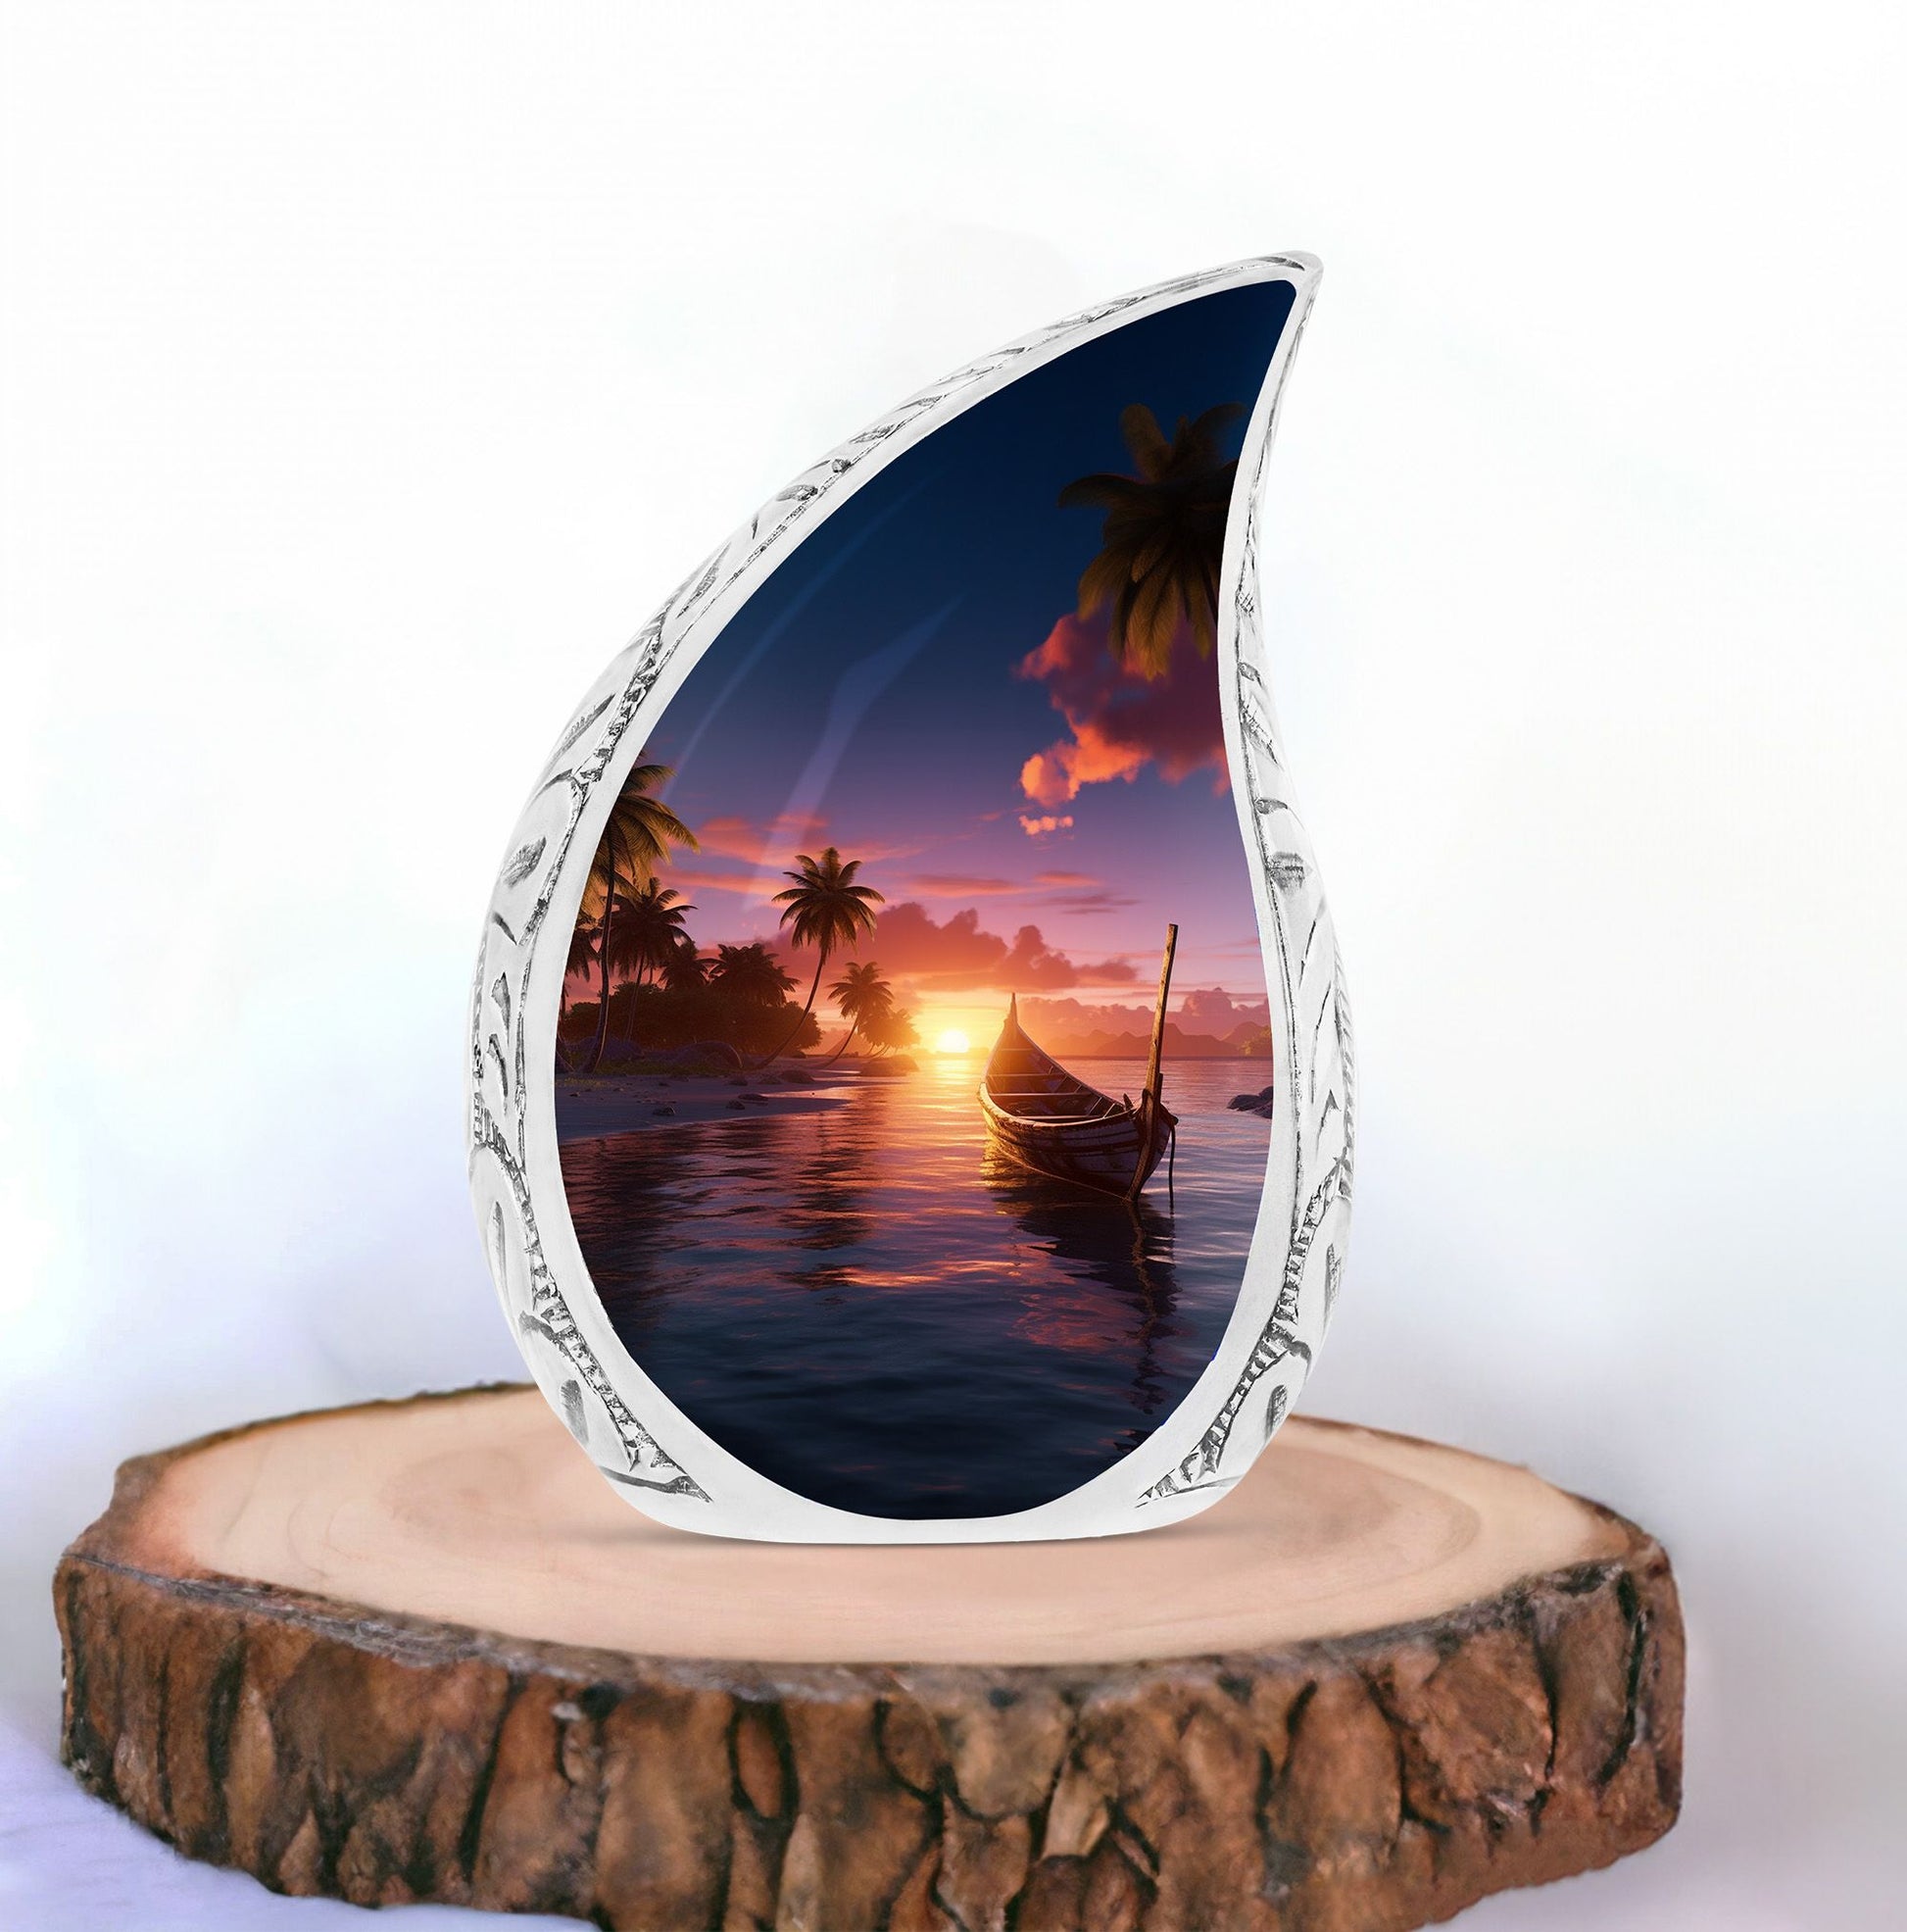 Large Tropical Sunset cremation urn, a unique funeral decoration designed to hold adult human ashes, made of sturdy metal